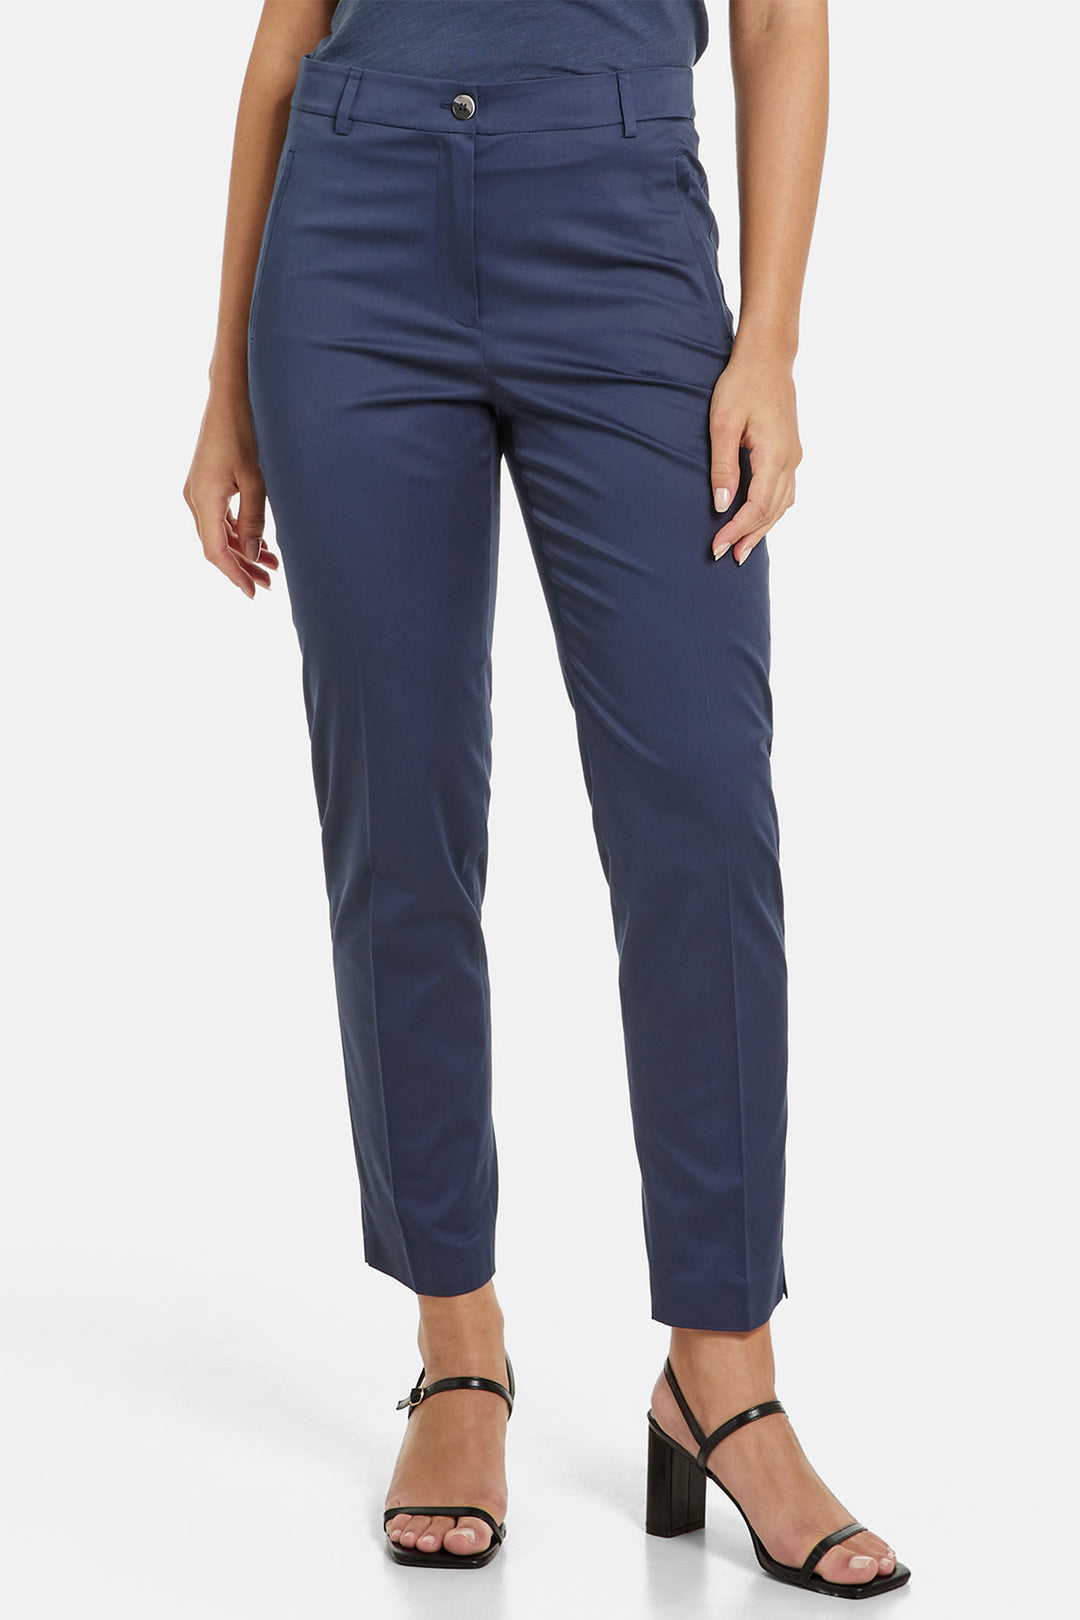 Gerry Weber 320035-31283 80936 Indigo Blue Chino Trousers - Experience Boutique